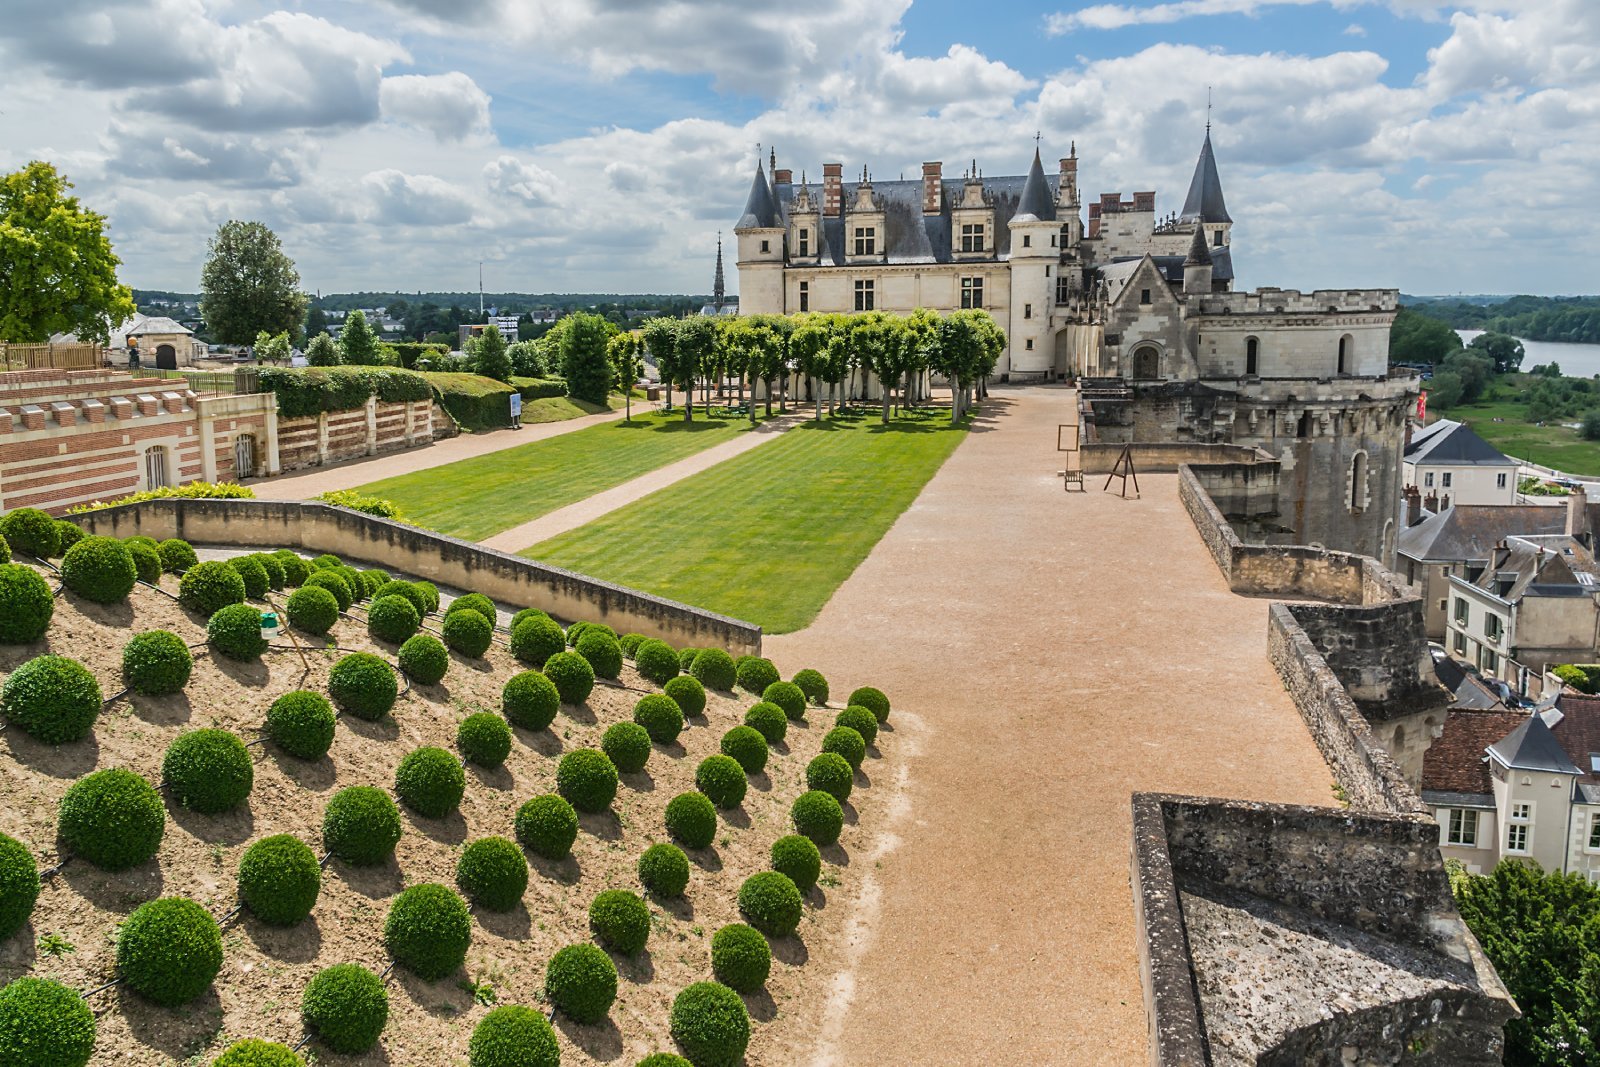 <p class="wp-caption-text">Image Credit: Shutterstock / Kiev.Victor</p>  <p><span>The Loire Valley, with its fairy-tale châteaux and sprawling vineyards, is an enchanting destination for seniors seeking a blend of history and natural beauty. This UNESCO World Heritage site is easily navigable by car or river cruise, offering access to historic castles, medieval towns, and lush gardens at a relaxed pace. Wine enthusiasts can indulge in tastings of the region’s famous Loire wines. The valley’s flat terrain is also ideal for leisurely cycling tours, offering a unique way to explore the countryside.</span></p>